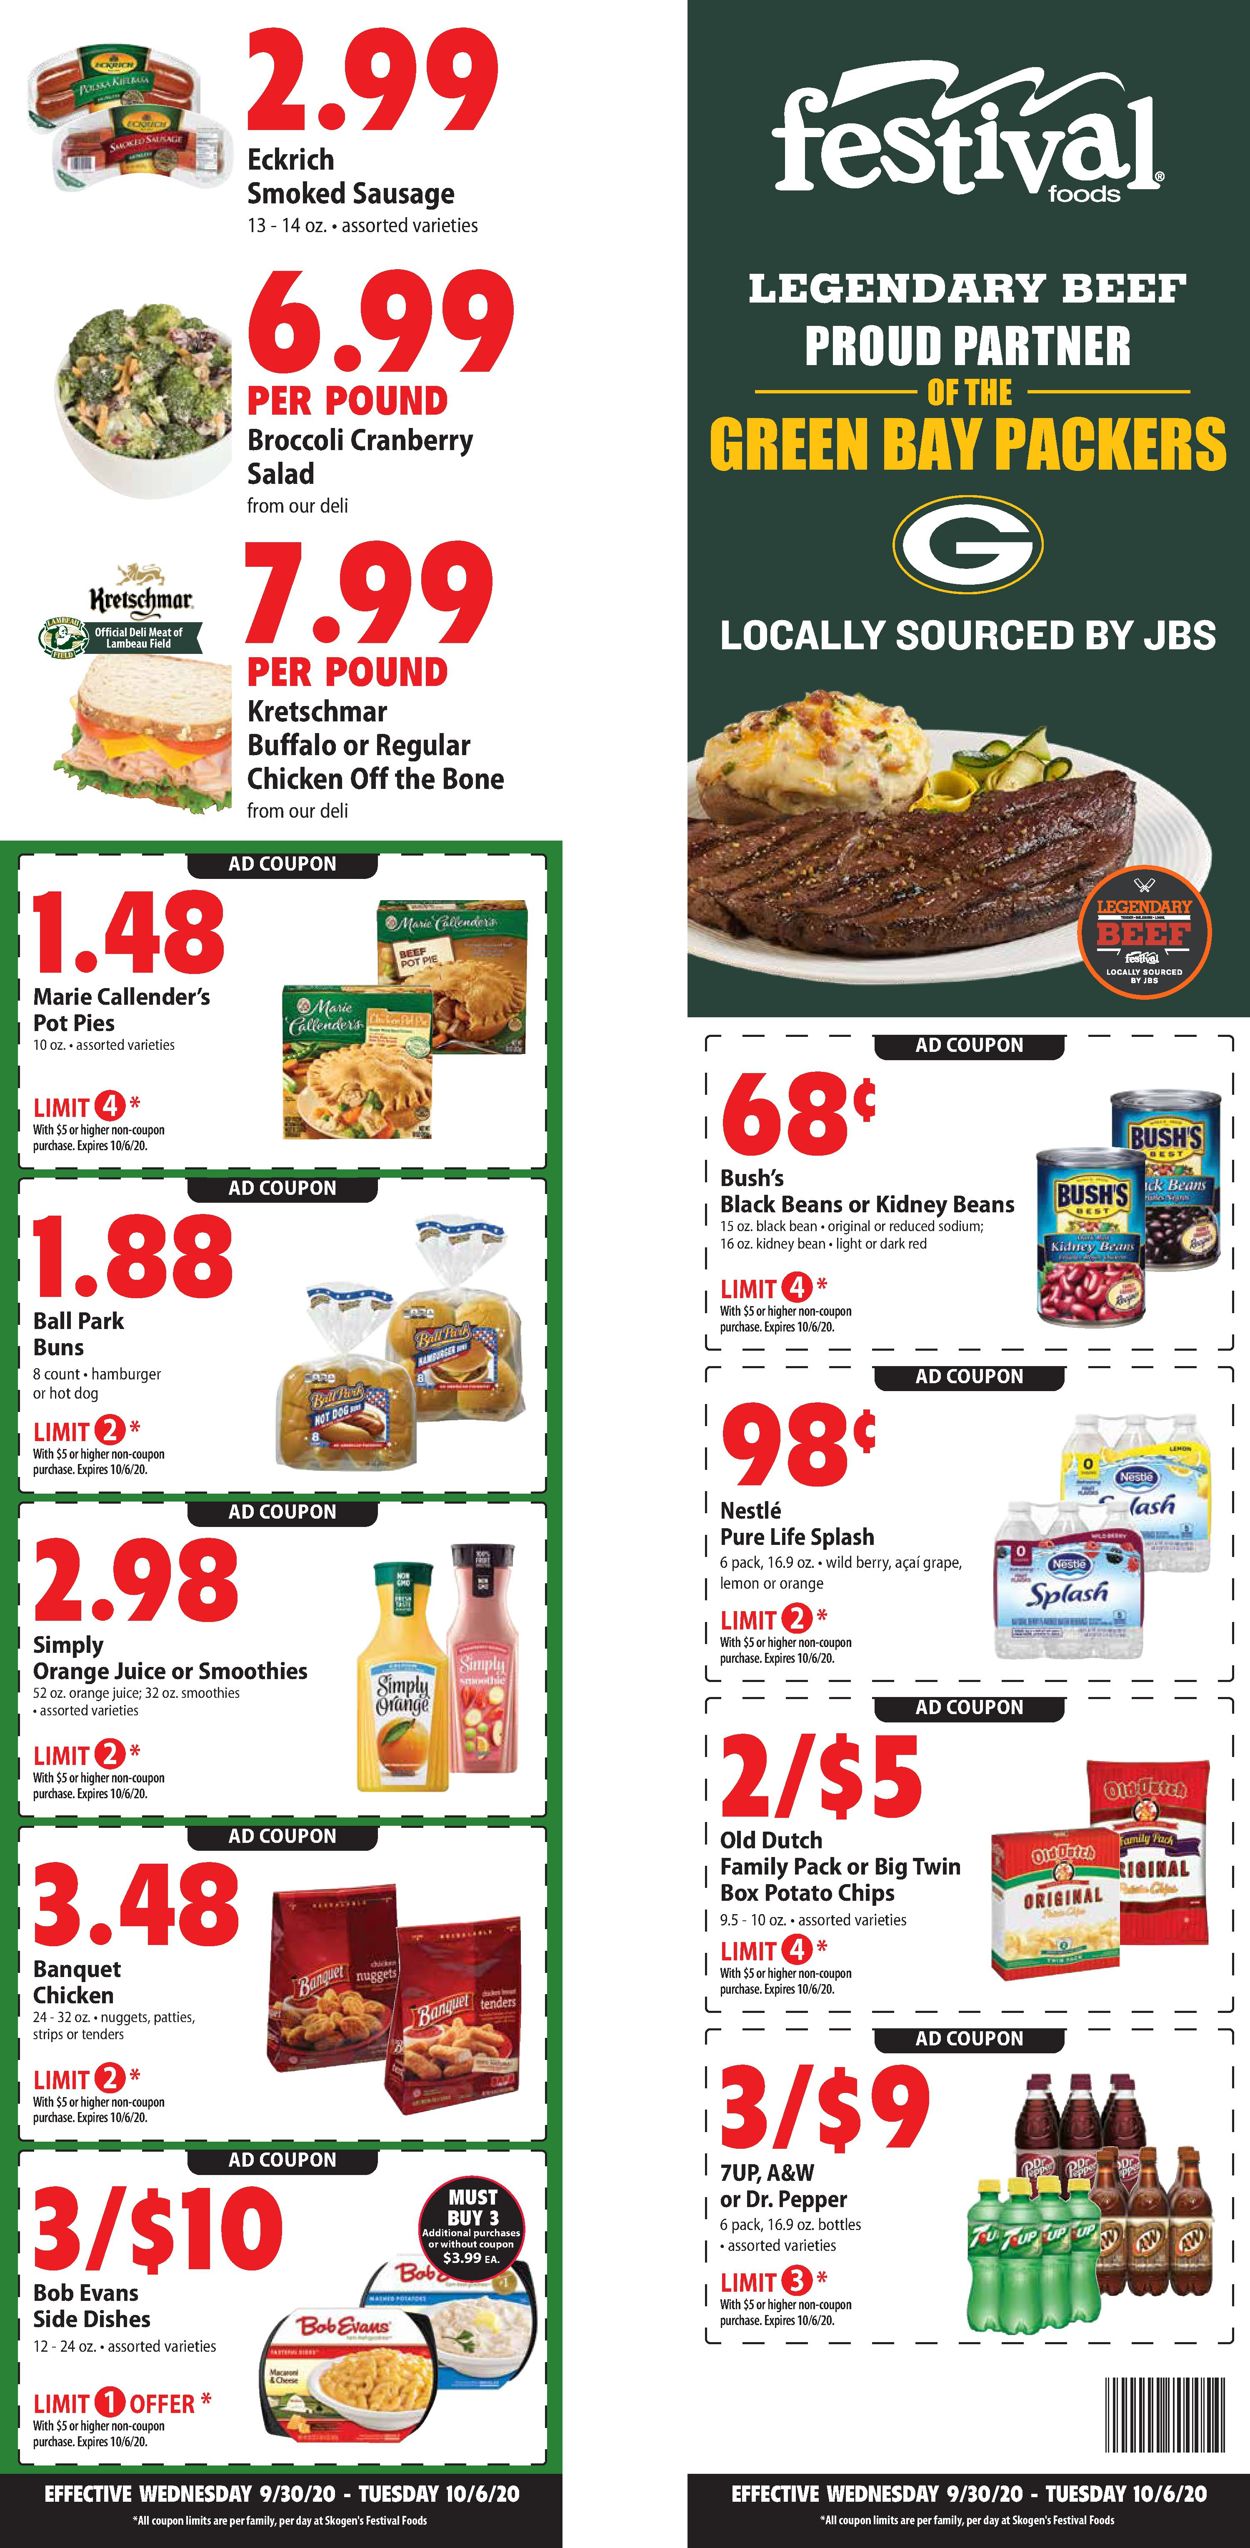 Festival Foods Current weekly ad 09/30 10/13/2020 [2]